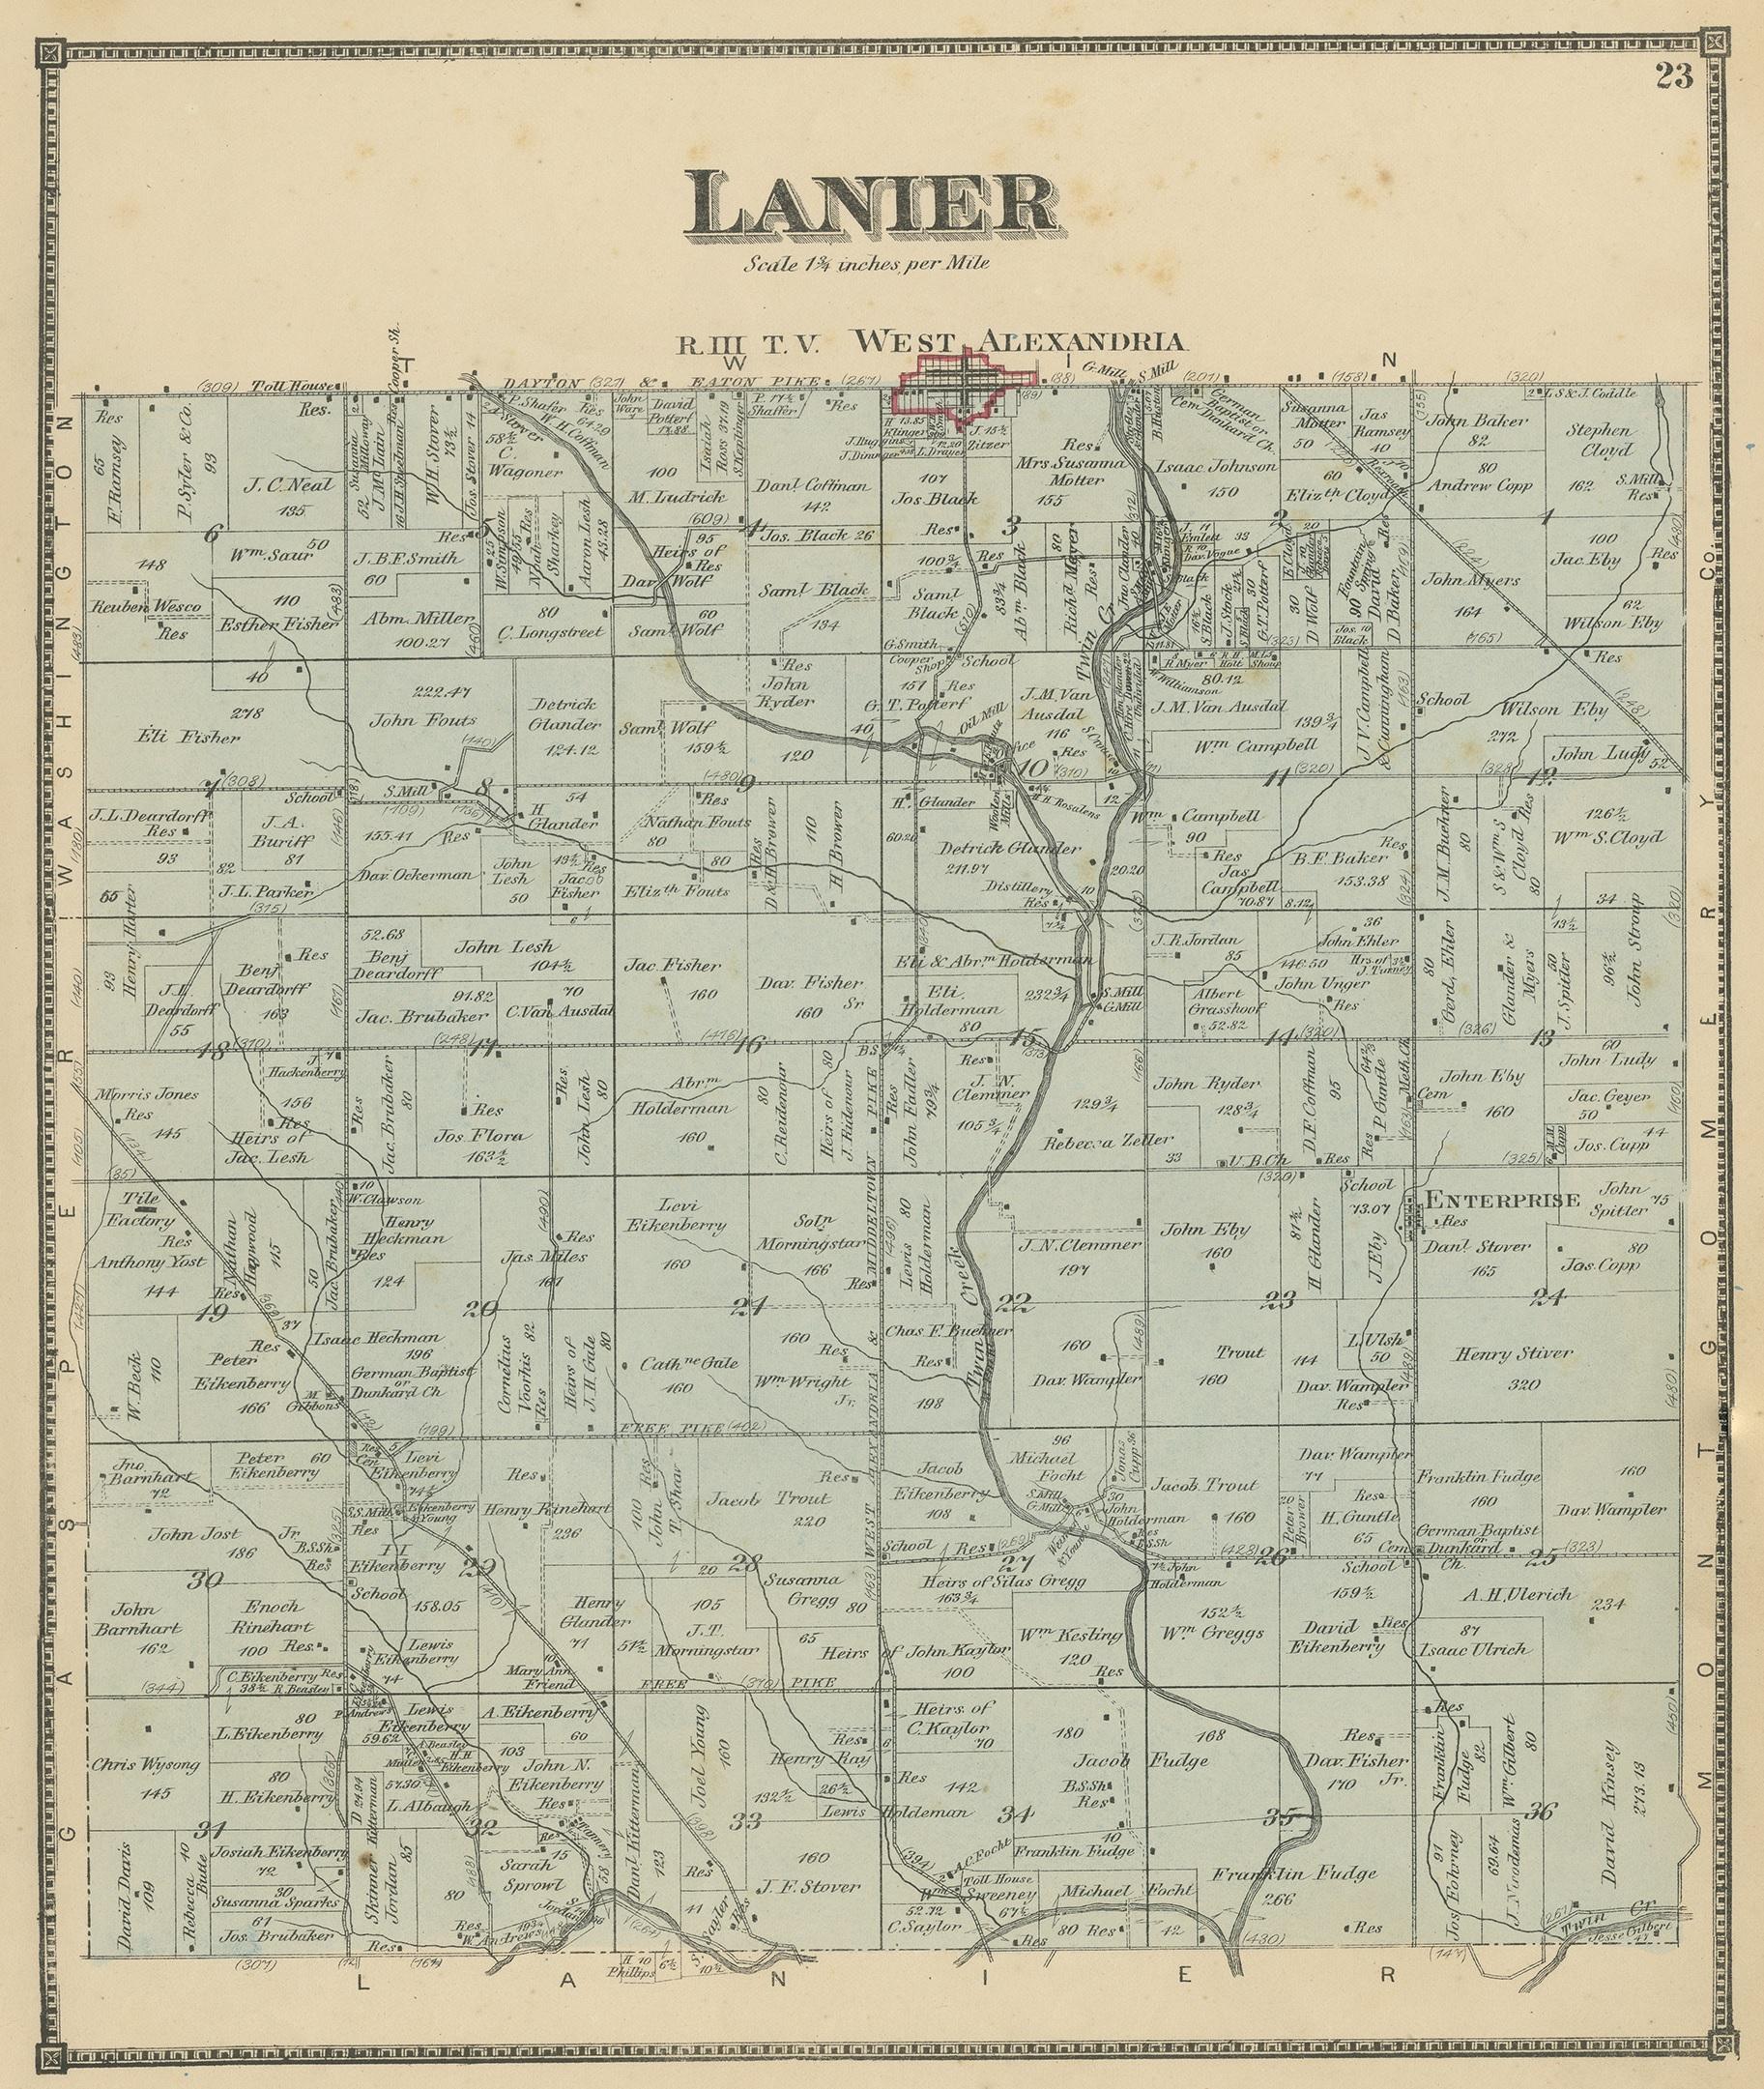 Antique map titled 'Lanier'. Original antique map of Lanier, Ohio. This map originates from 'Atlas of Preble County Ohio' by C.O. Titus. Published, 1871.